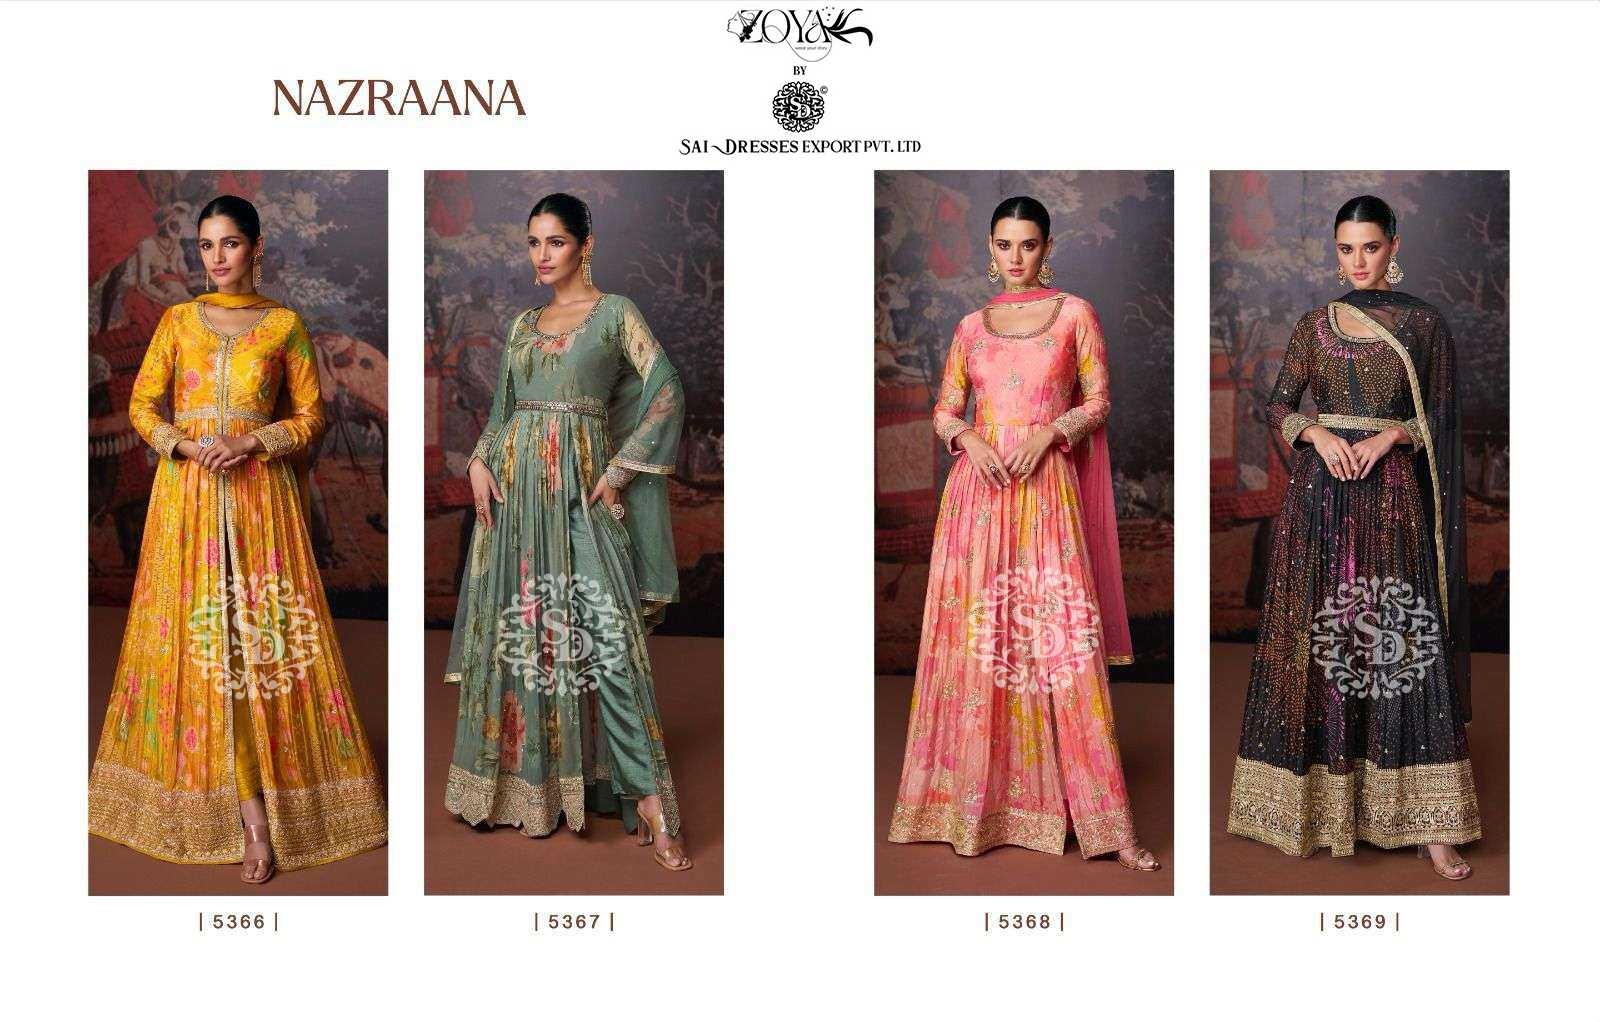 SAI DRESSES PRESENT NAZRAANA READYMADE PARTY WEAR HEAVY DESIGNER SUITS IN WHOLESALE RATE IN SURAT